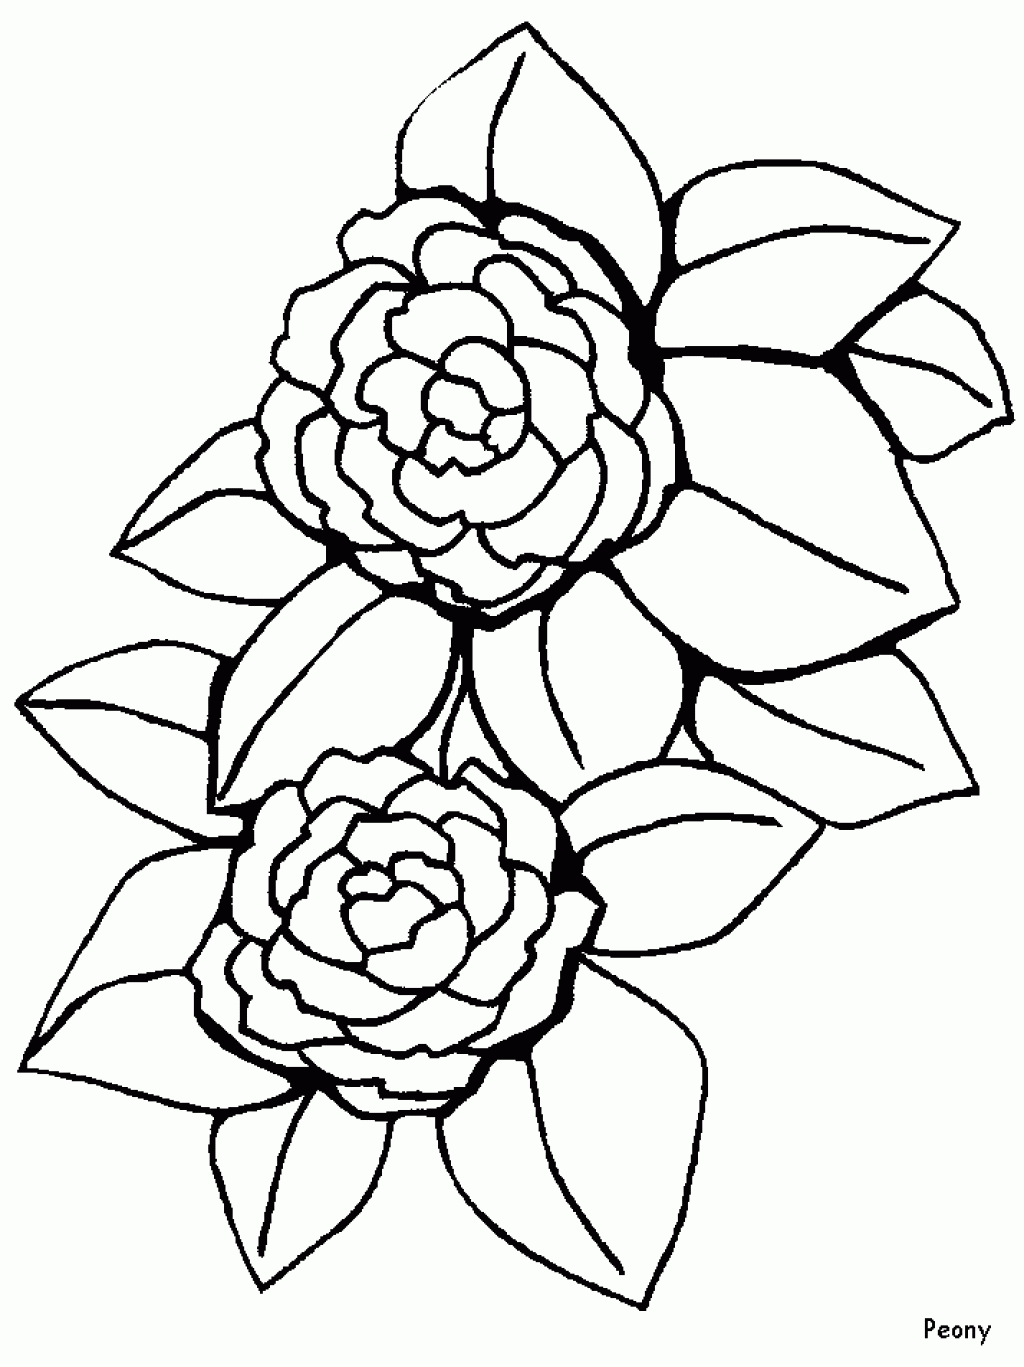 Peony coloring #18, Download drawings